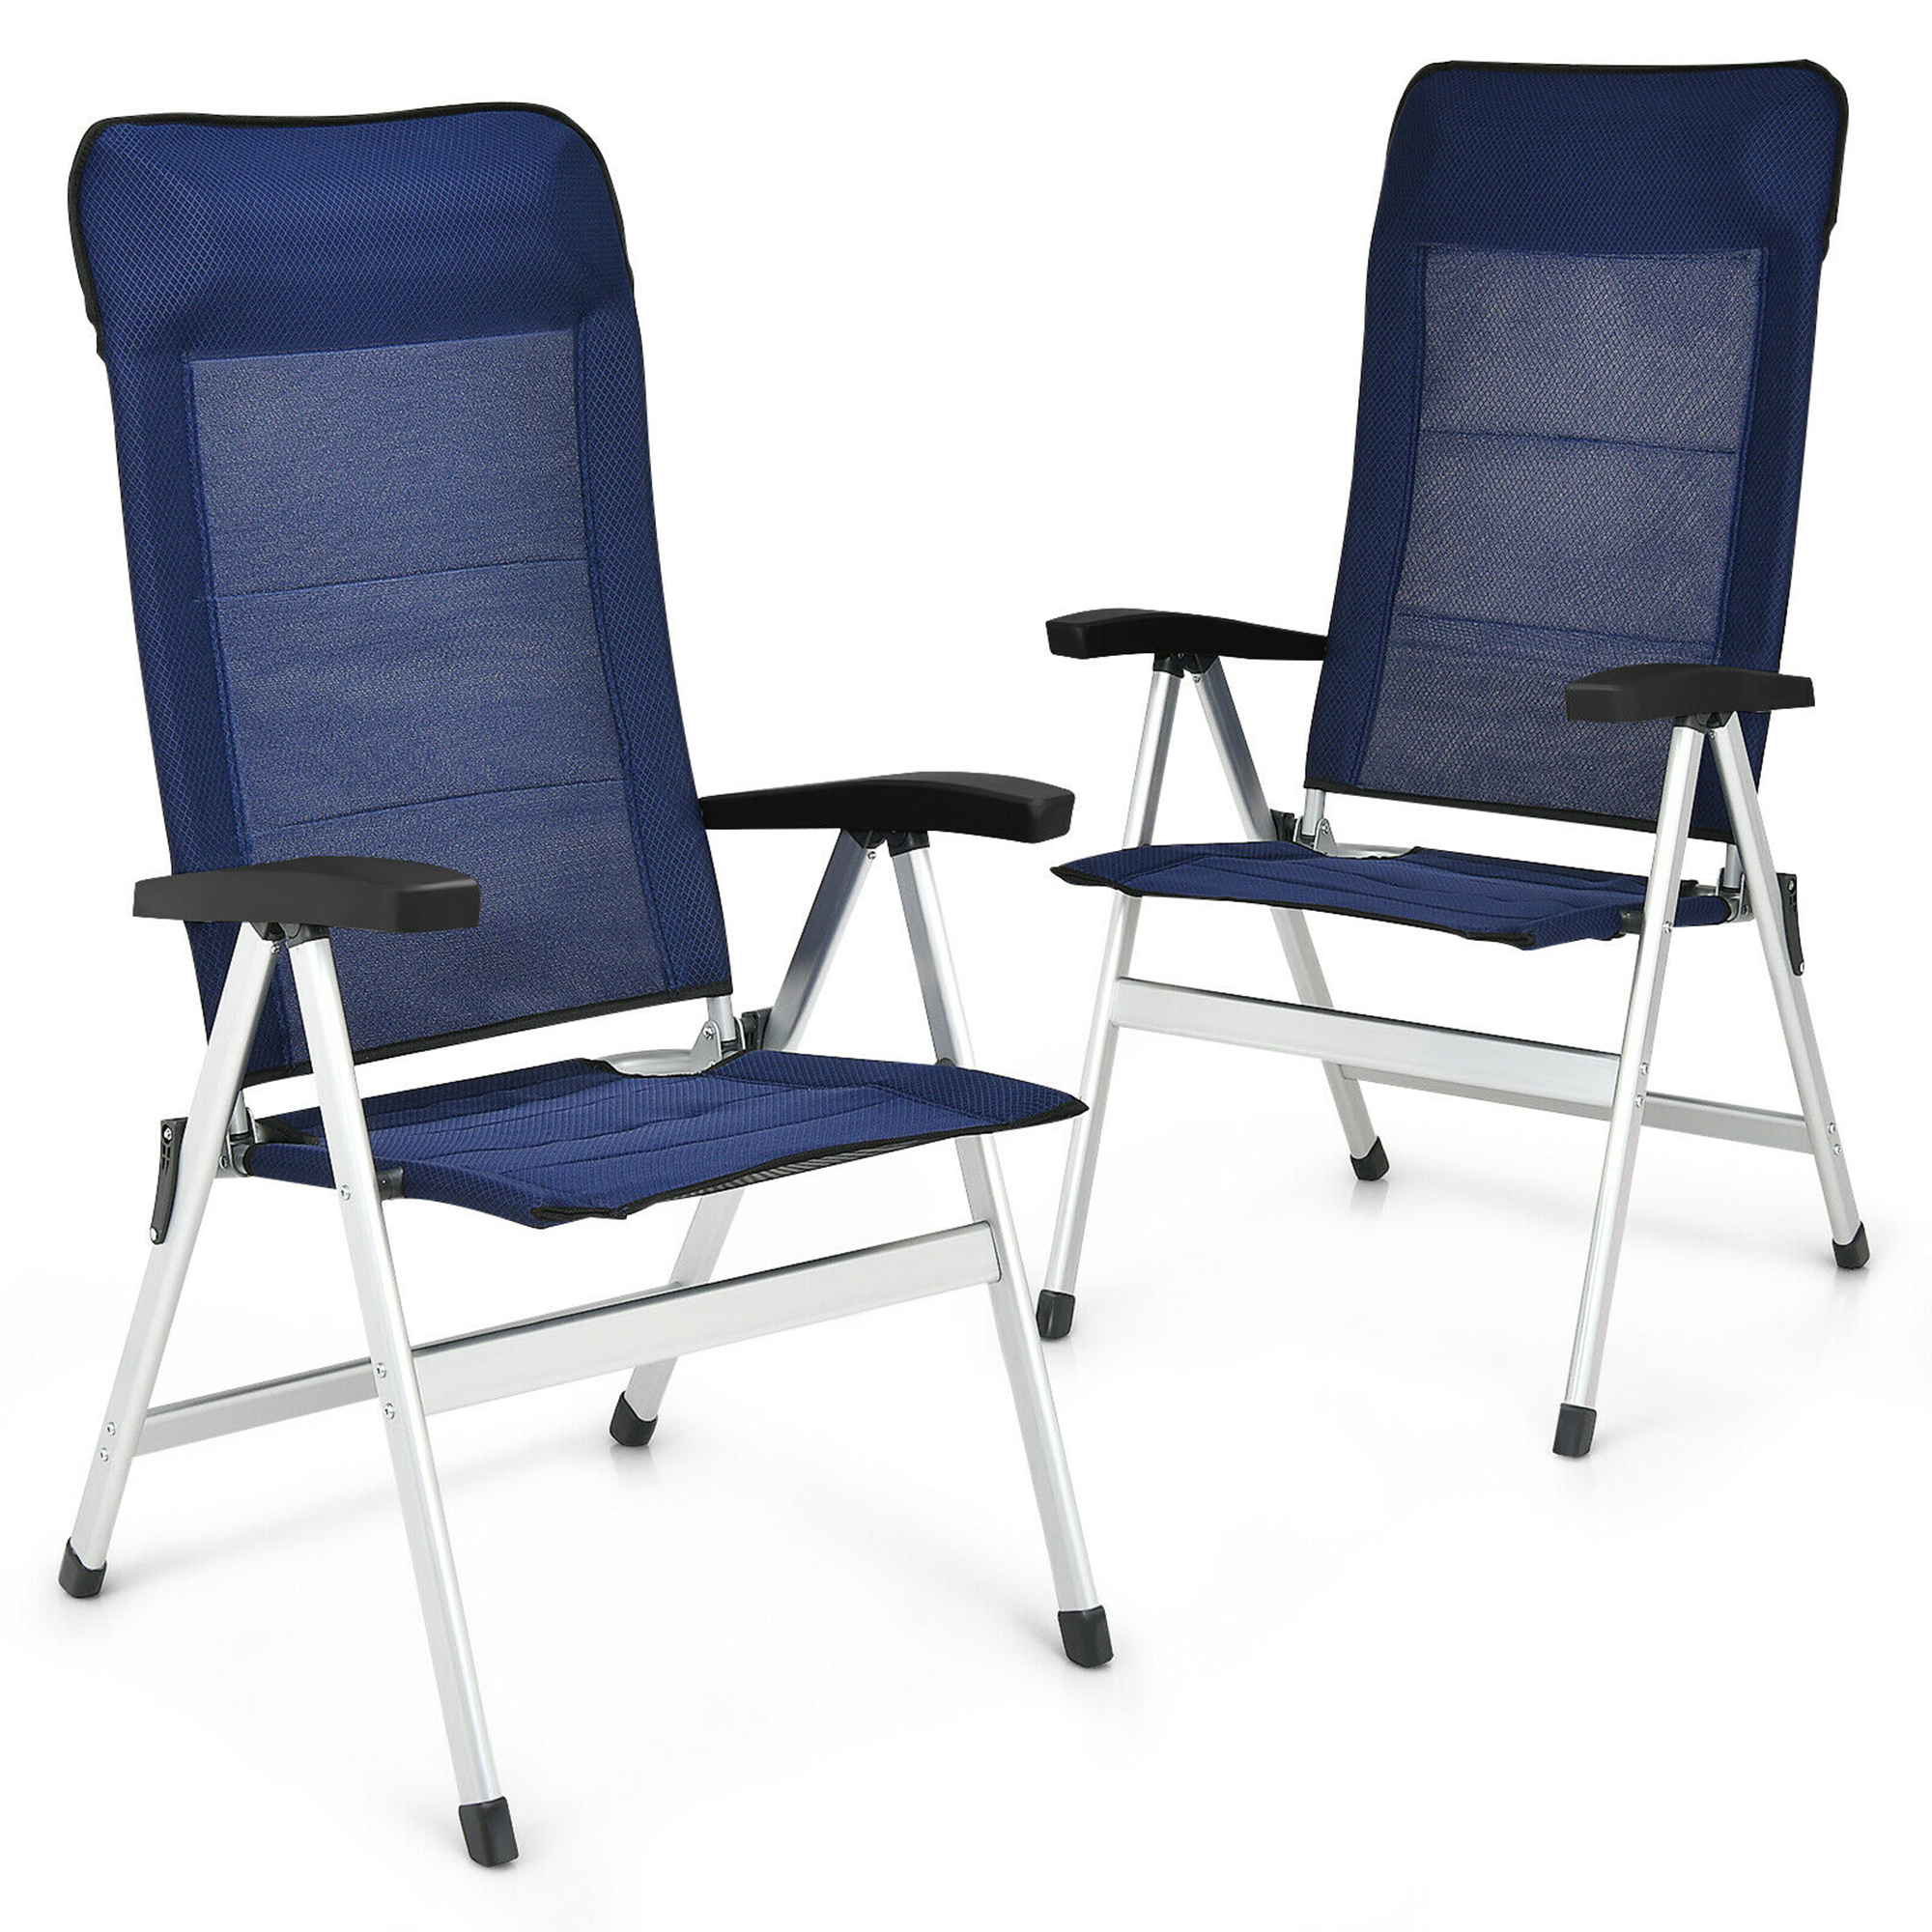 Costway 2PCS Patio Dining Chair Aluminum Camping Adjust Portable Headrest Navy - image 1 of 10